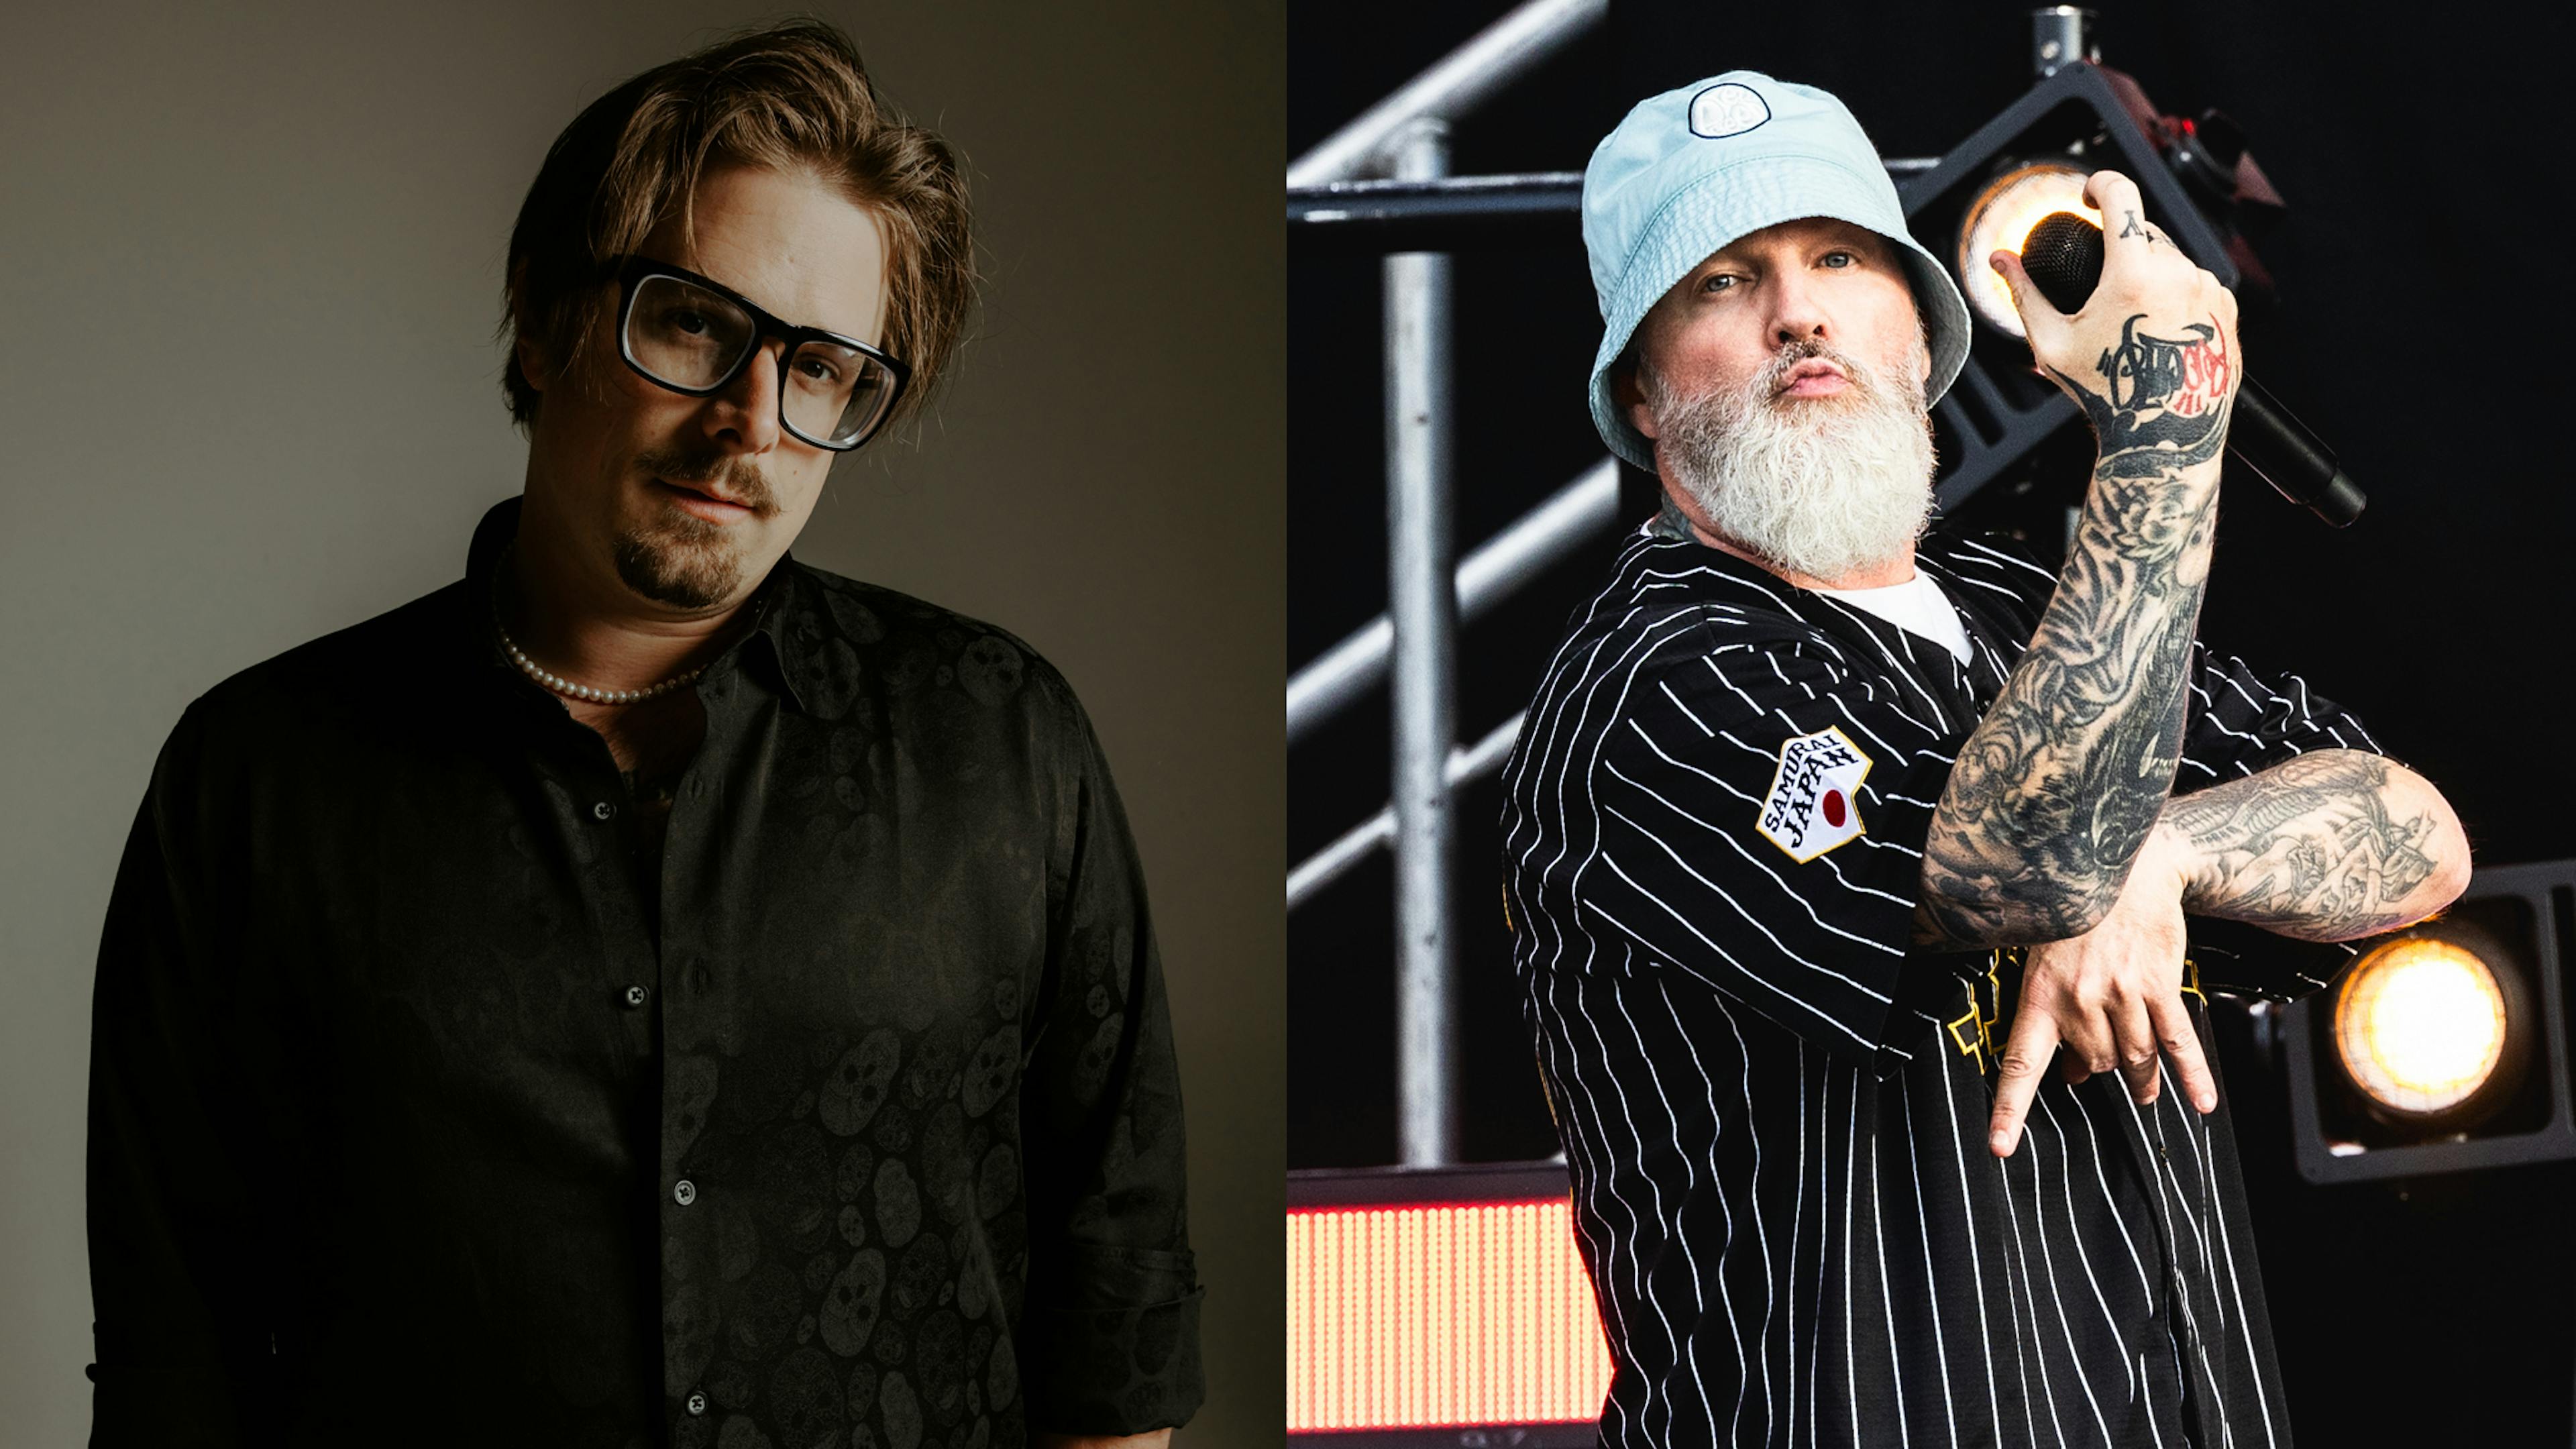 Listen to Fred Durst guest on country rock singer HARDY’s new album